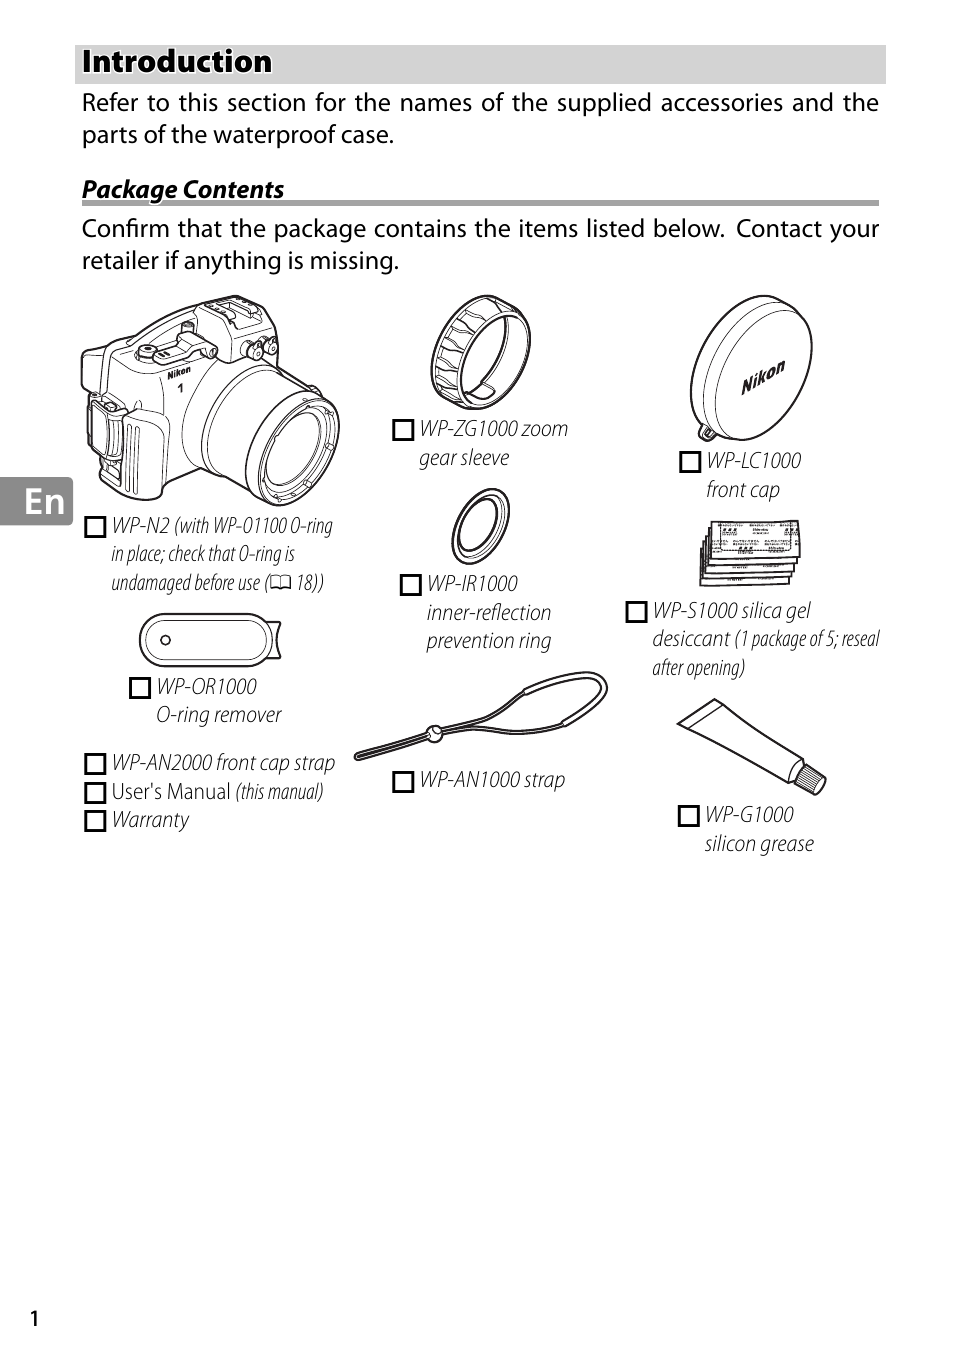 Introduction, Package contents | Nikon WP-N2 User Manual | Page 40 / 260